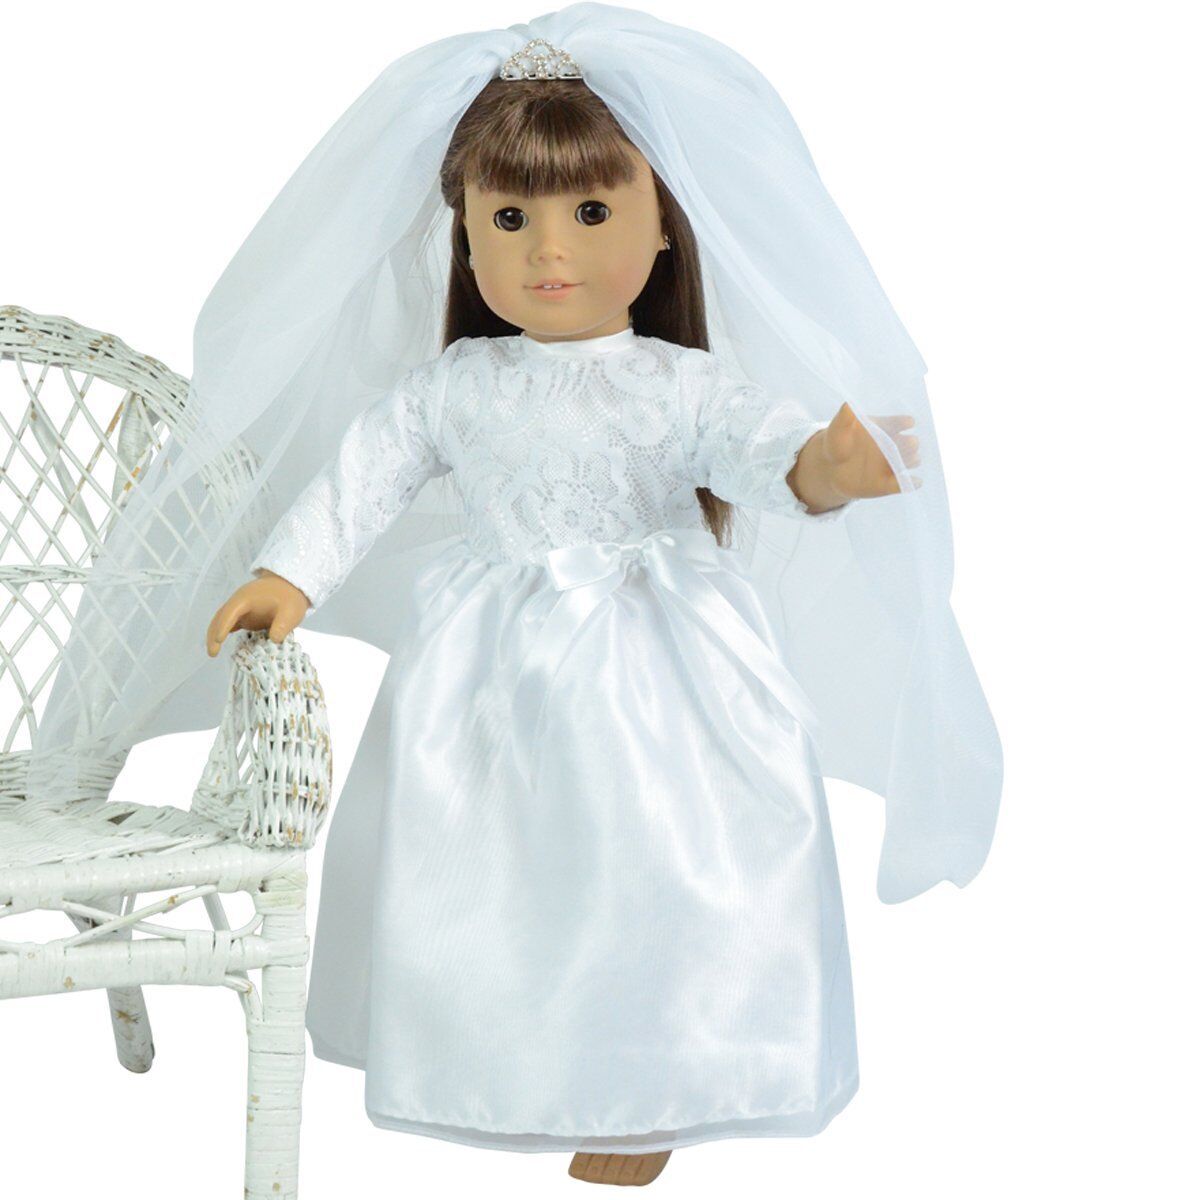 Wedding Gown and Veil with Tiara Attractive 期間限定 NEW 最安値挑戦 Dolls inch 18